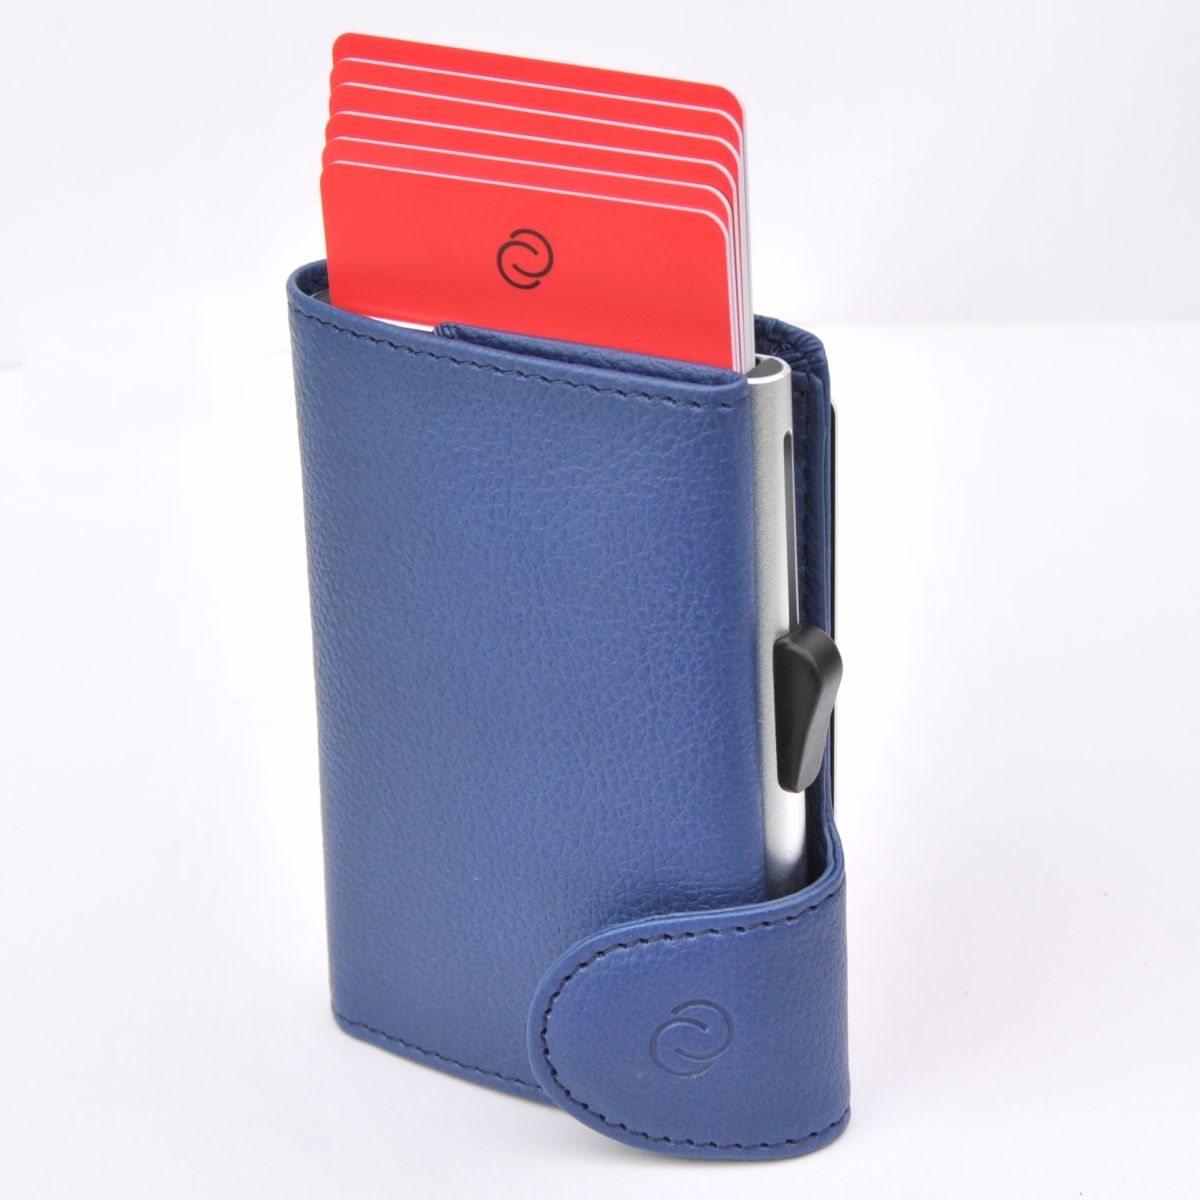 C-Secure Aluminum Card Holder with Genuine Leather - Blue